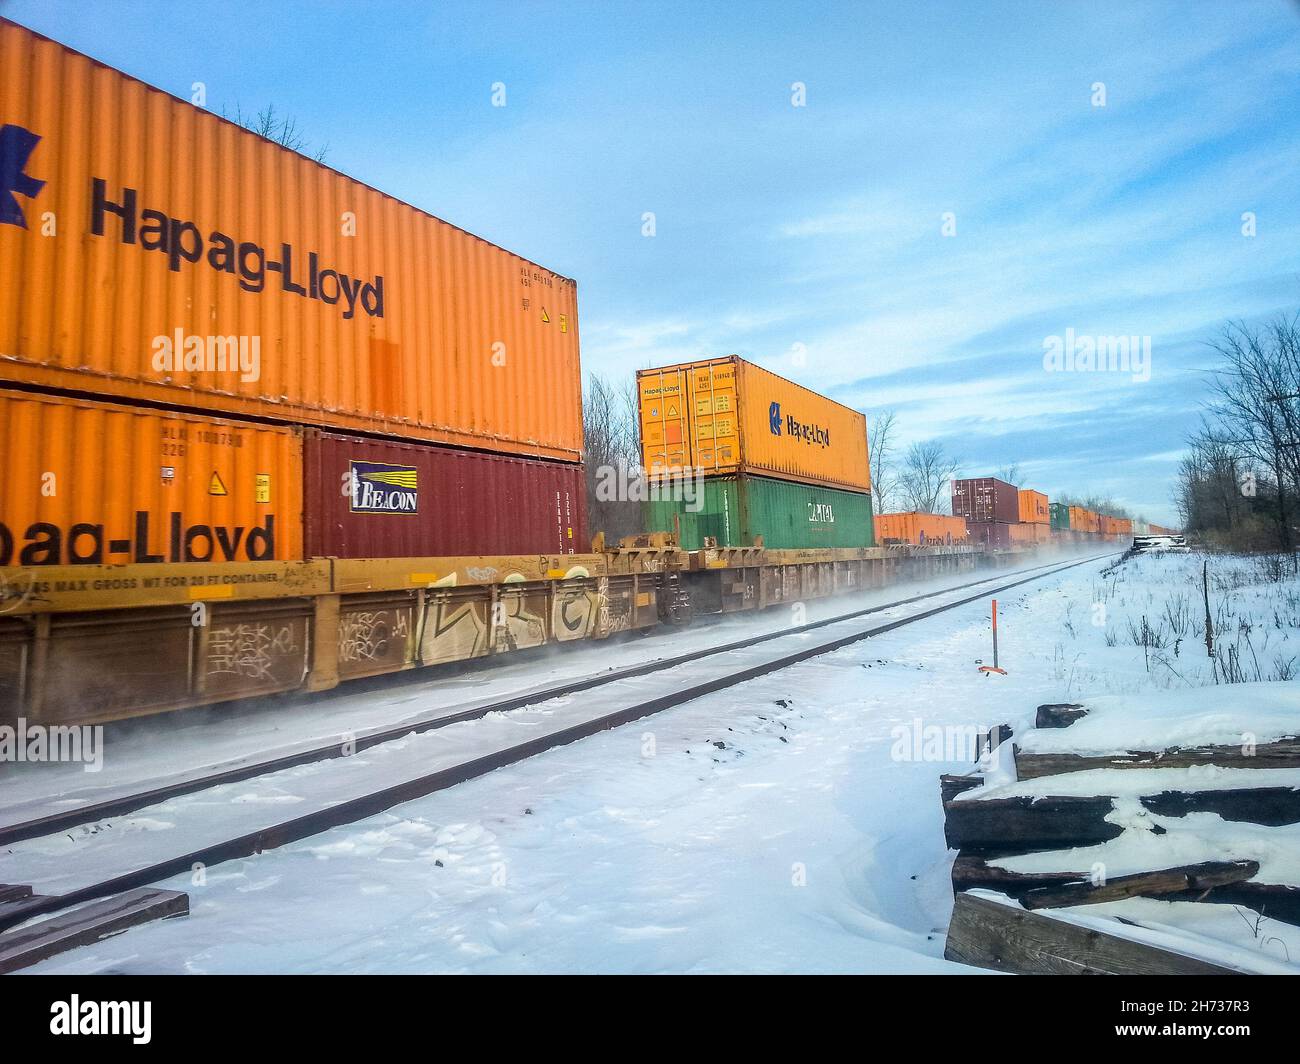 Angled view of railcars on the left side of photo, with orange, red and green box cars travelling on the train track on a sunny, snowy, winter day. Stock Photo